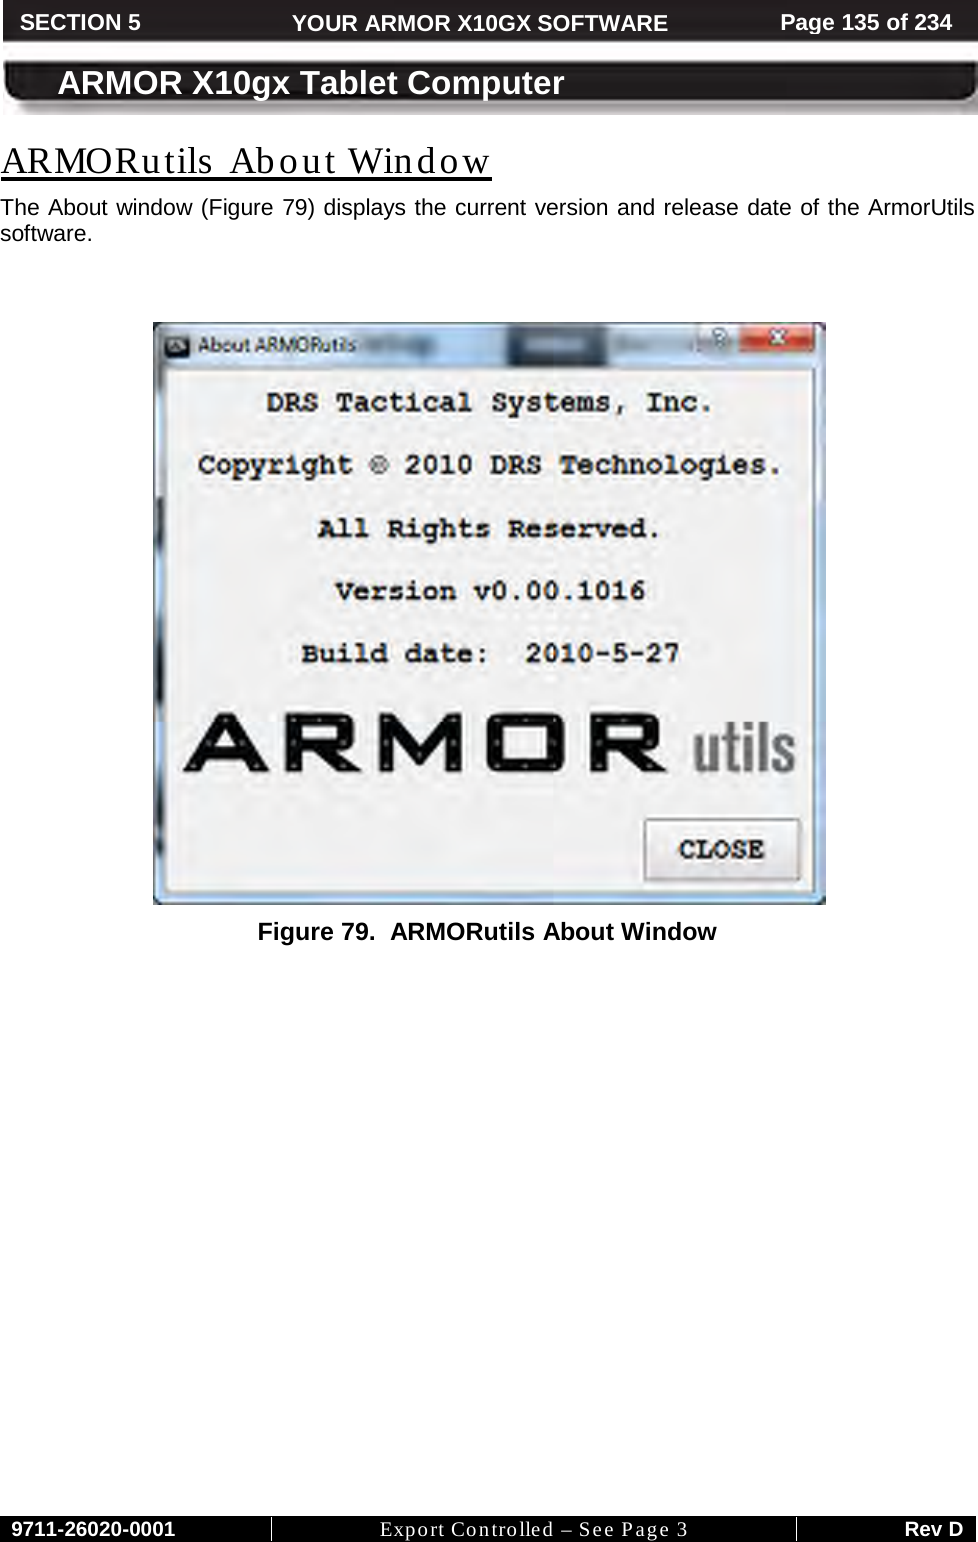     9711-26020-0001 Export Controlled – See Page 3 Rev D SECTION 5 YOUR ARMOR X10GX SOFTWARE Page 135 of 234  ARMOR X10gx Tablet Computer ARMORutils  About Window The About window (Figure 79) displays the current version and release date of the ArmorUtils software.     Figure 79.  ARMORutils About Window   